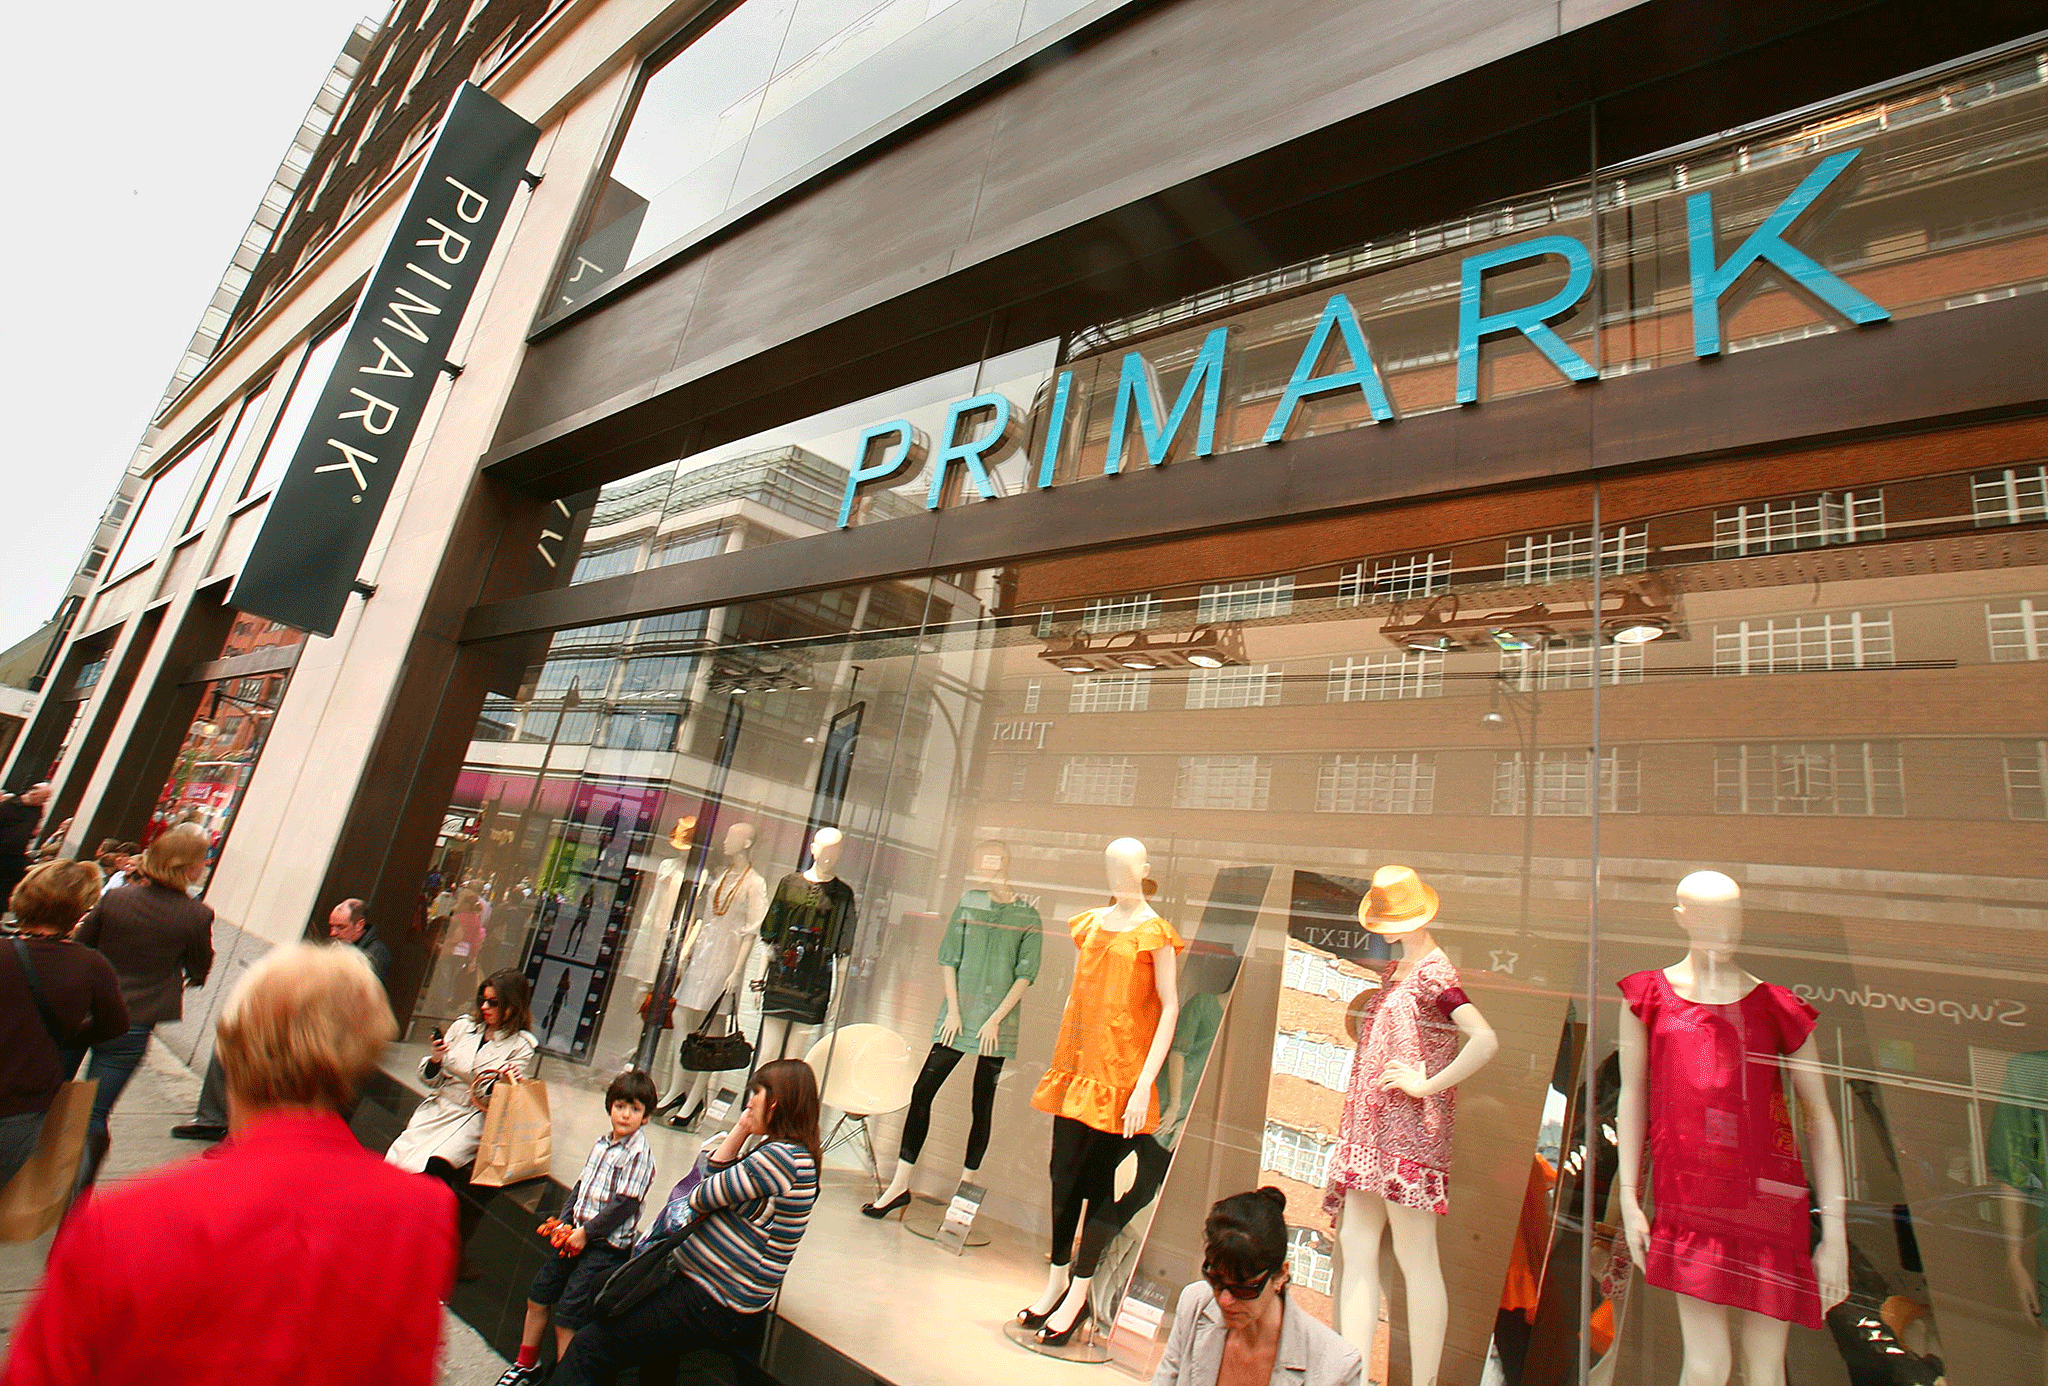 Brexit blows £200m hole in Primark’s pension fund